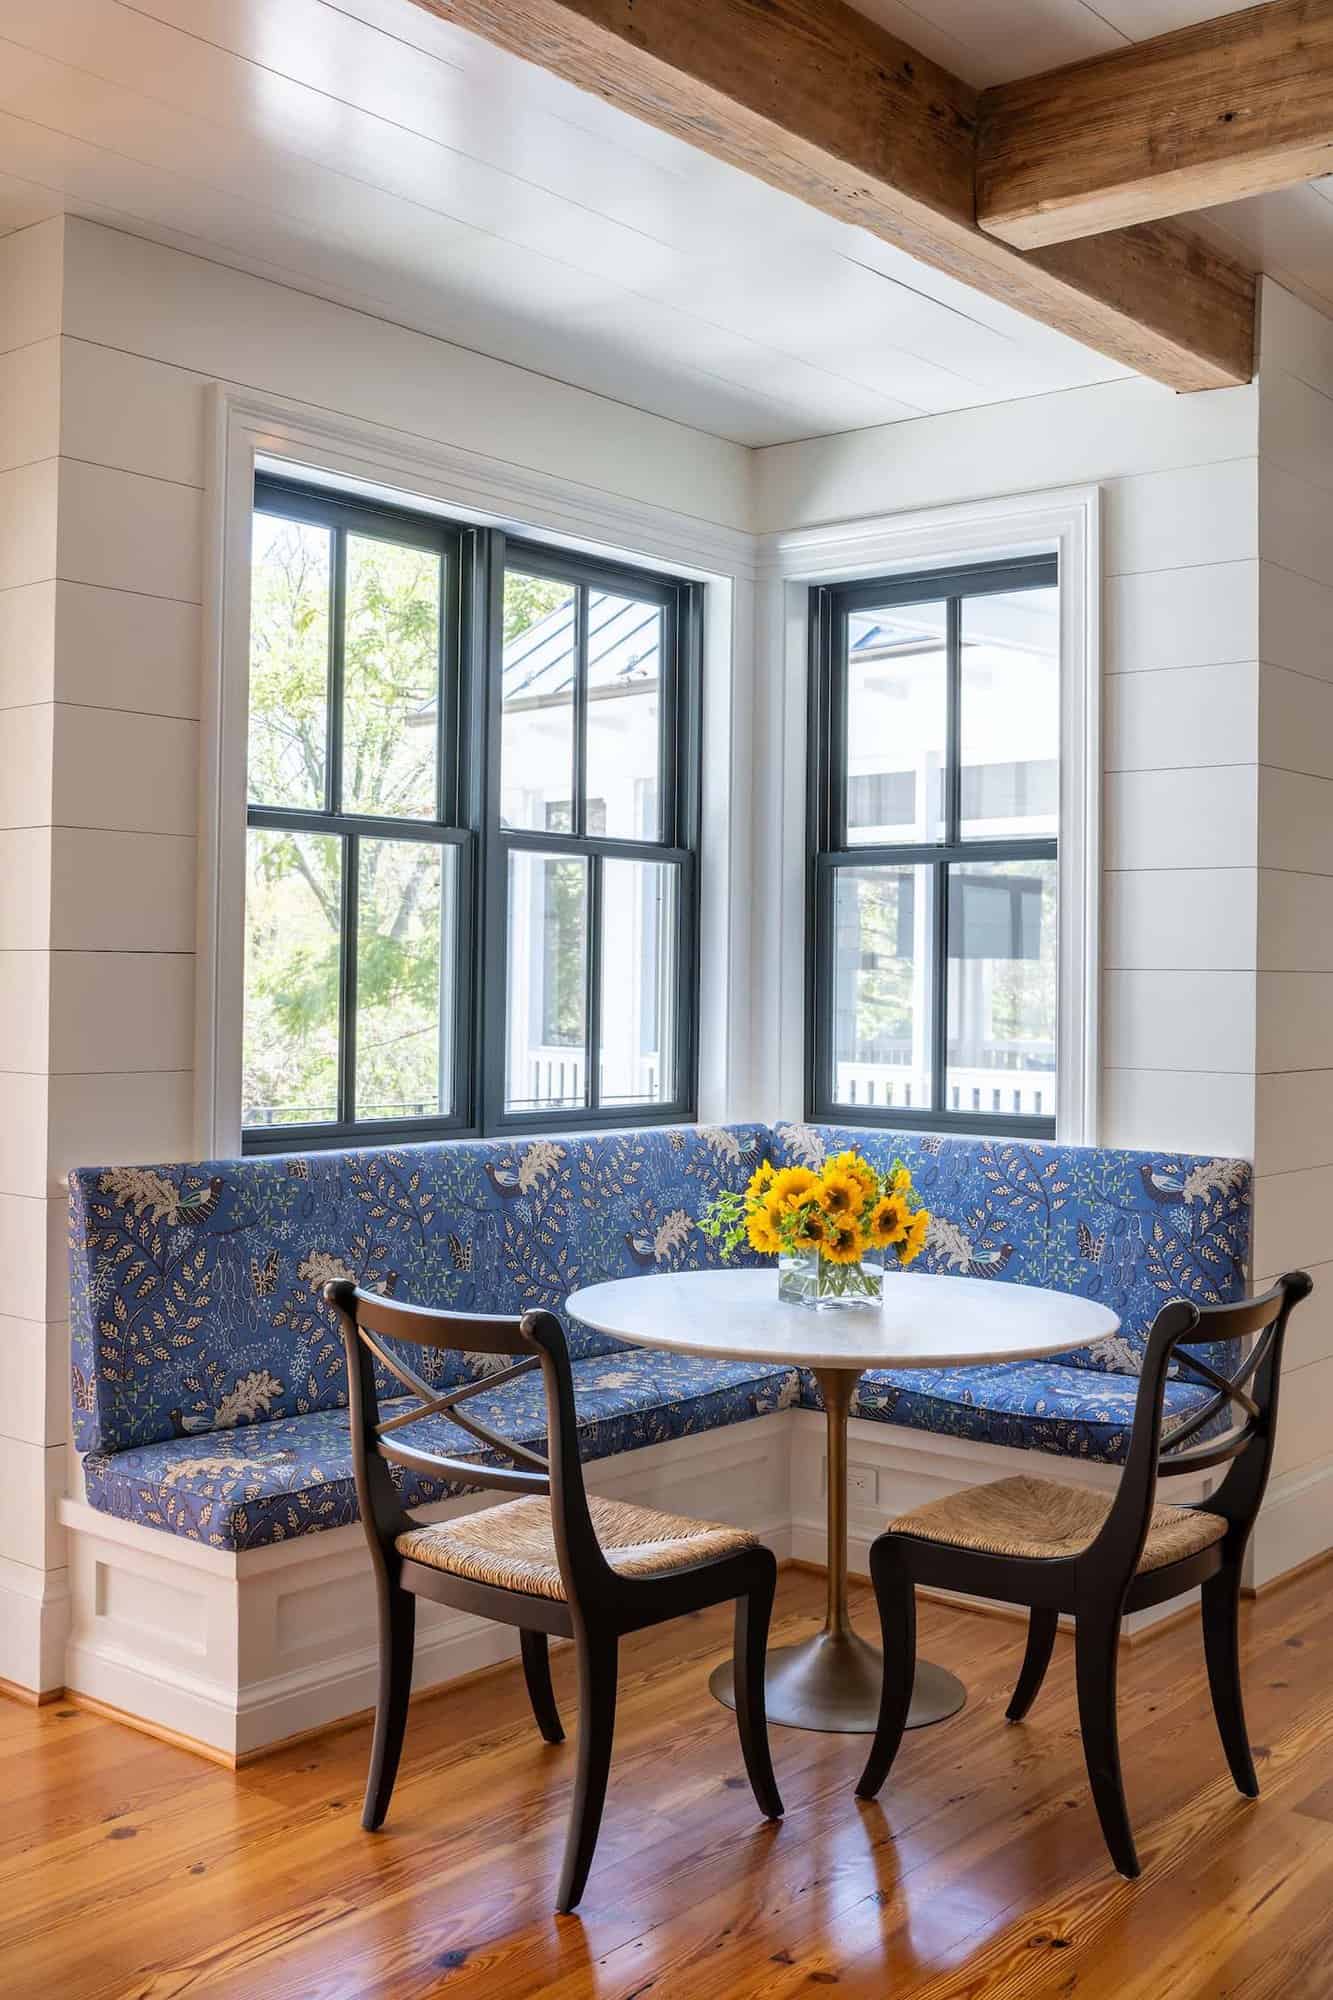 contemporary kitchen breakfast nook with built-in window banquette